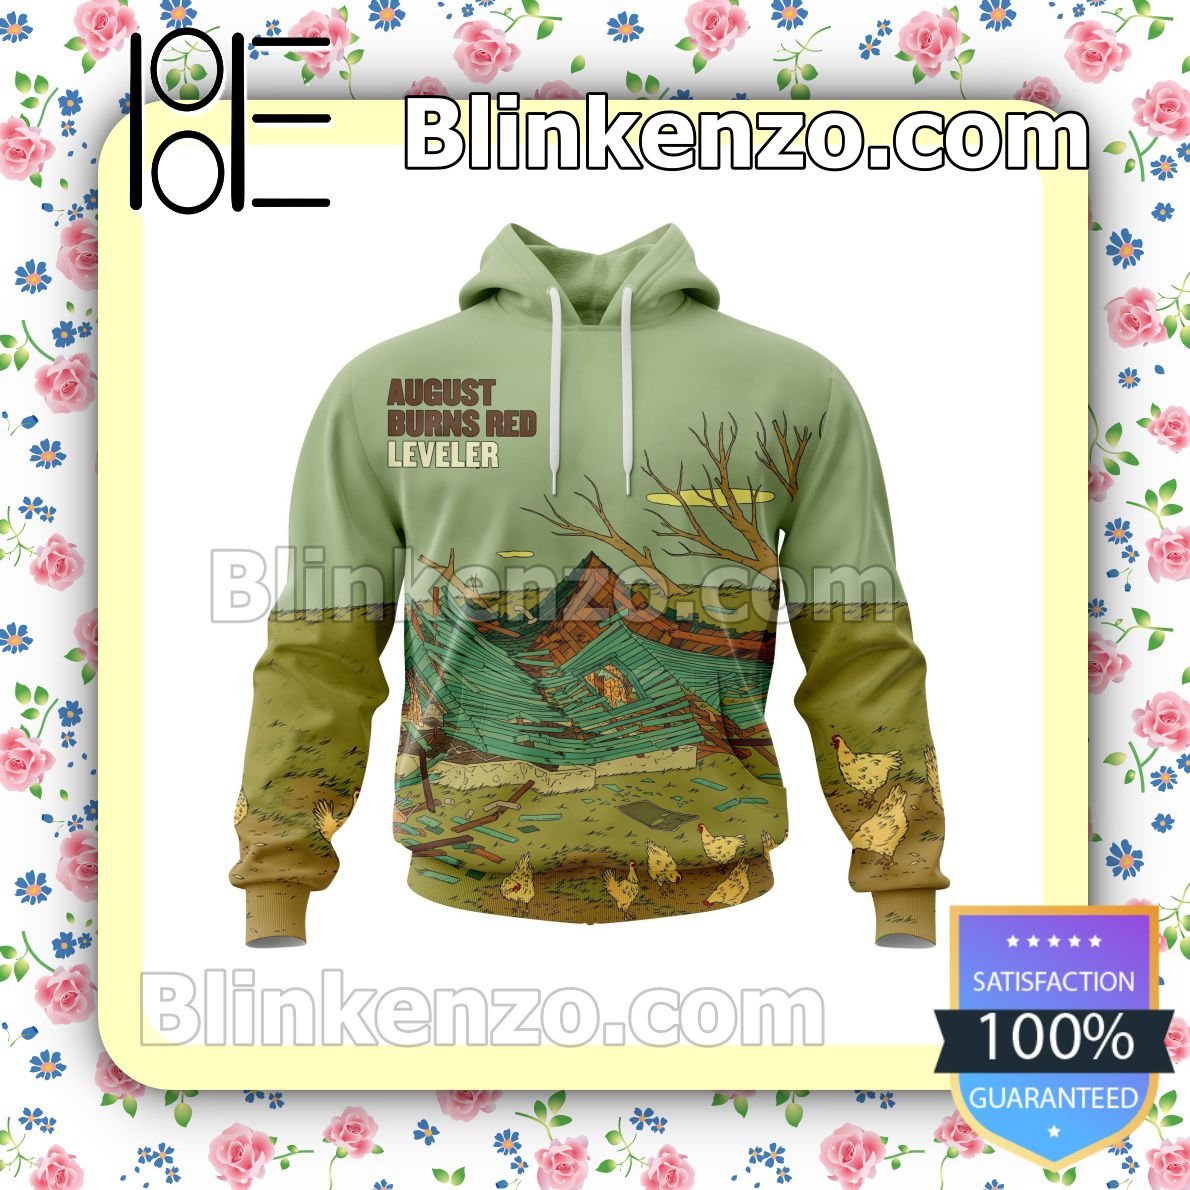 Personalized August Burns Red Leveler Album Cover Hooded Sweatshirt